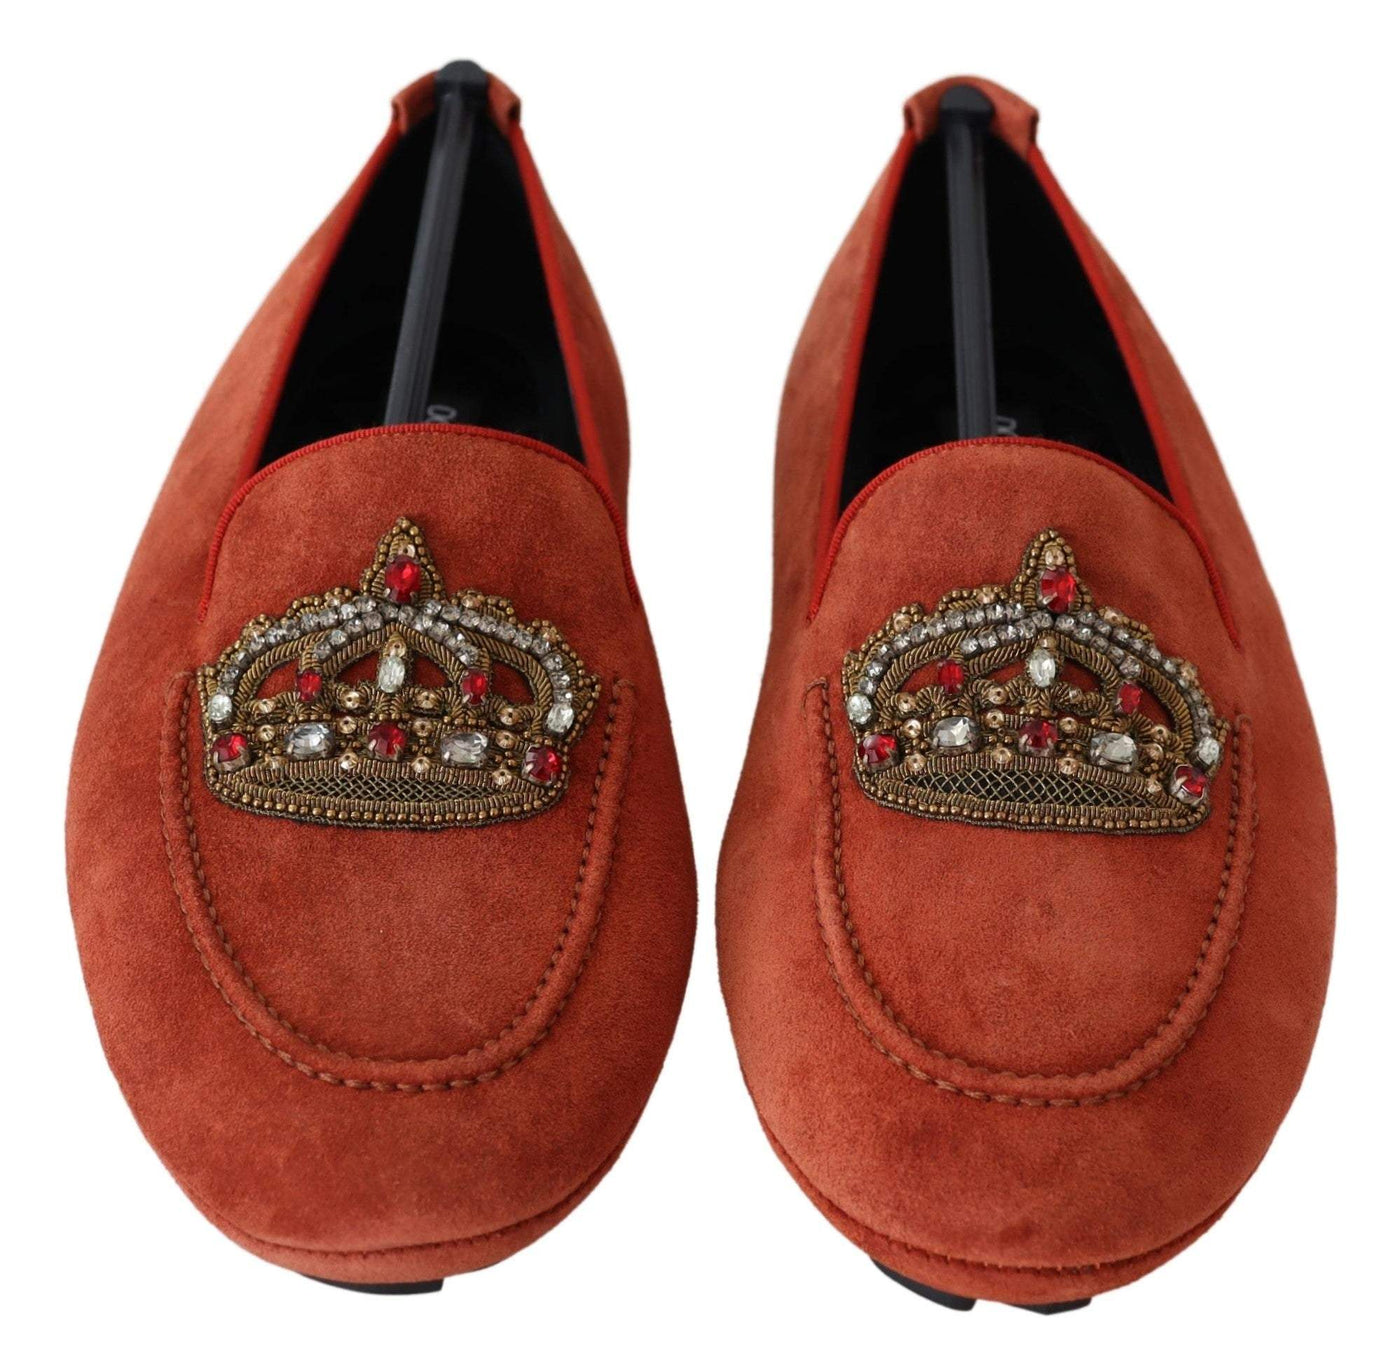 Dolce & Gabbana Orange Leather Crystal Crown  Loafers Shoes #men, Dolce & Gabbana, EU40/US7, feed-1, Loafers - Men - Shoes, Orange, Shoes - New Arrivals at SEYMAYKA